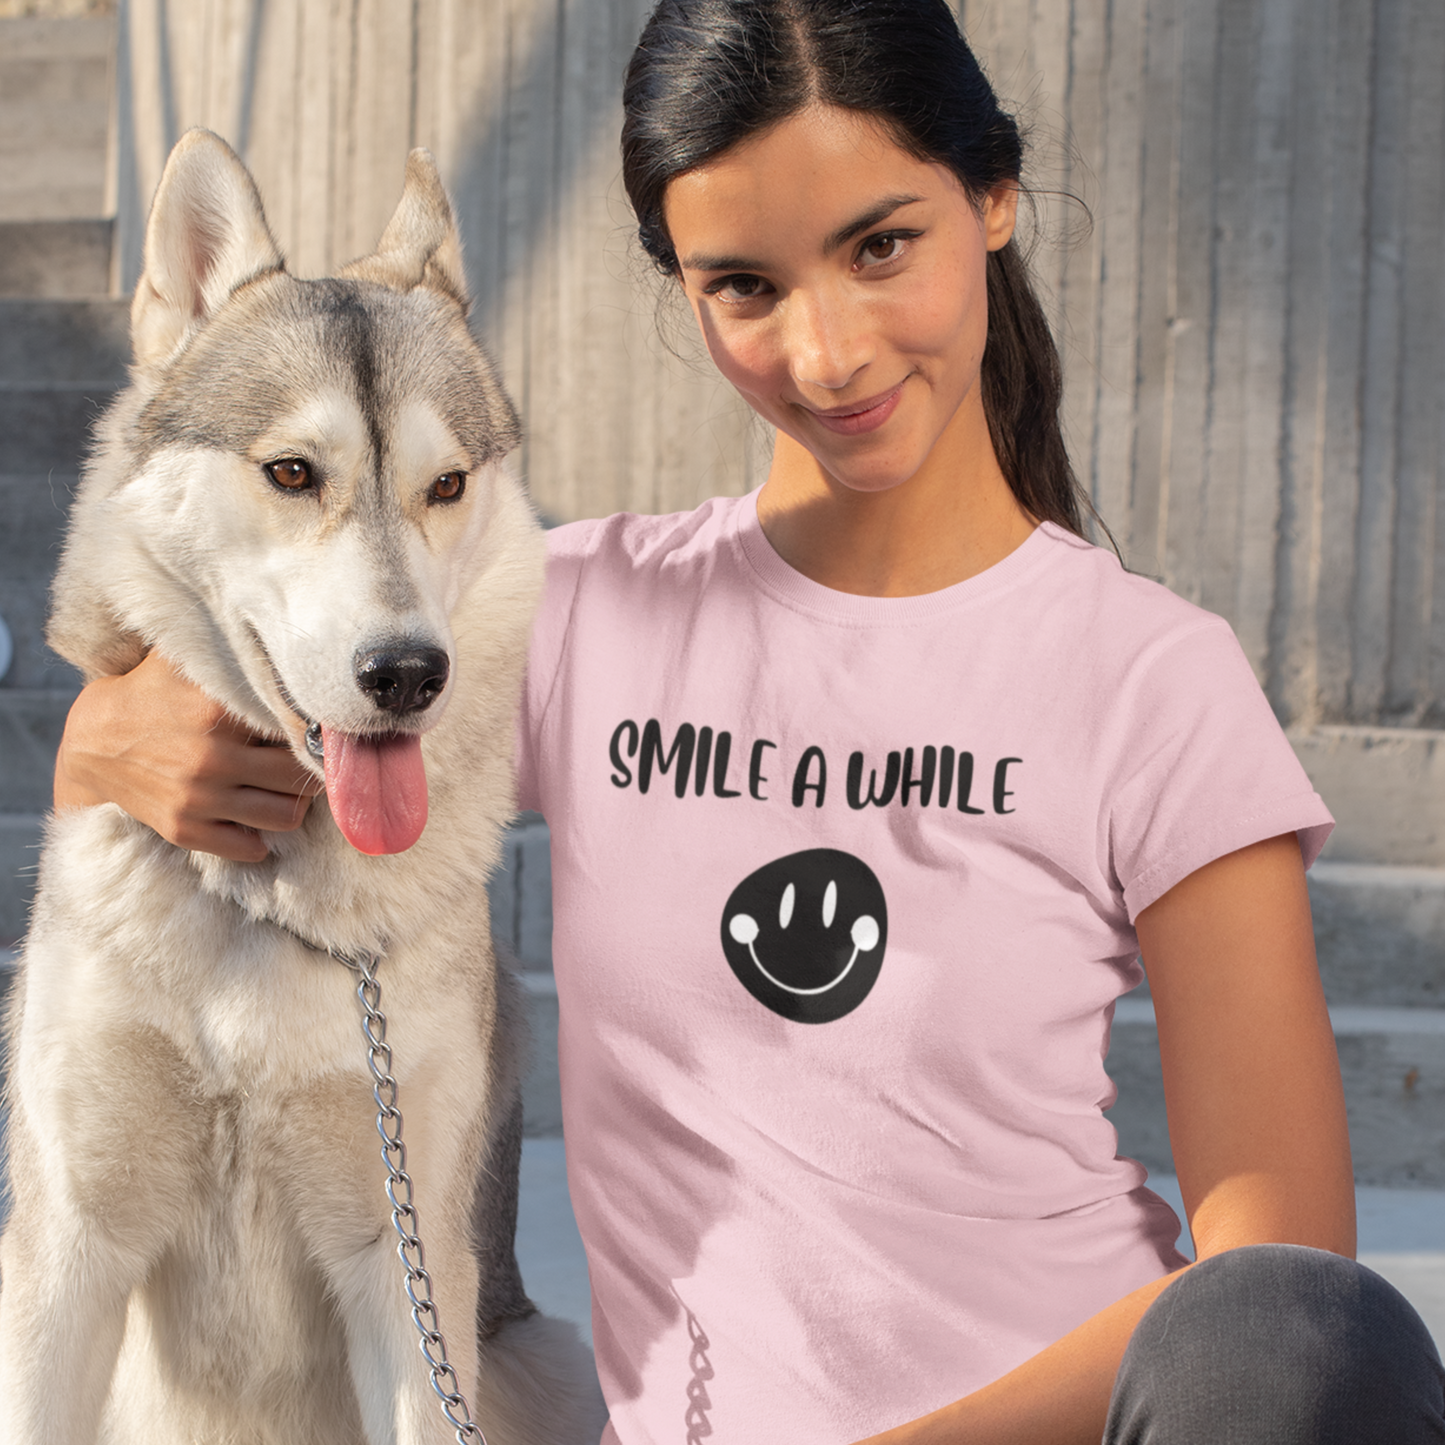 Smile a while inspirational words t shirts gift, t shirts gift that motivates, t shirt gifts for friends